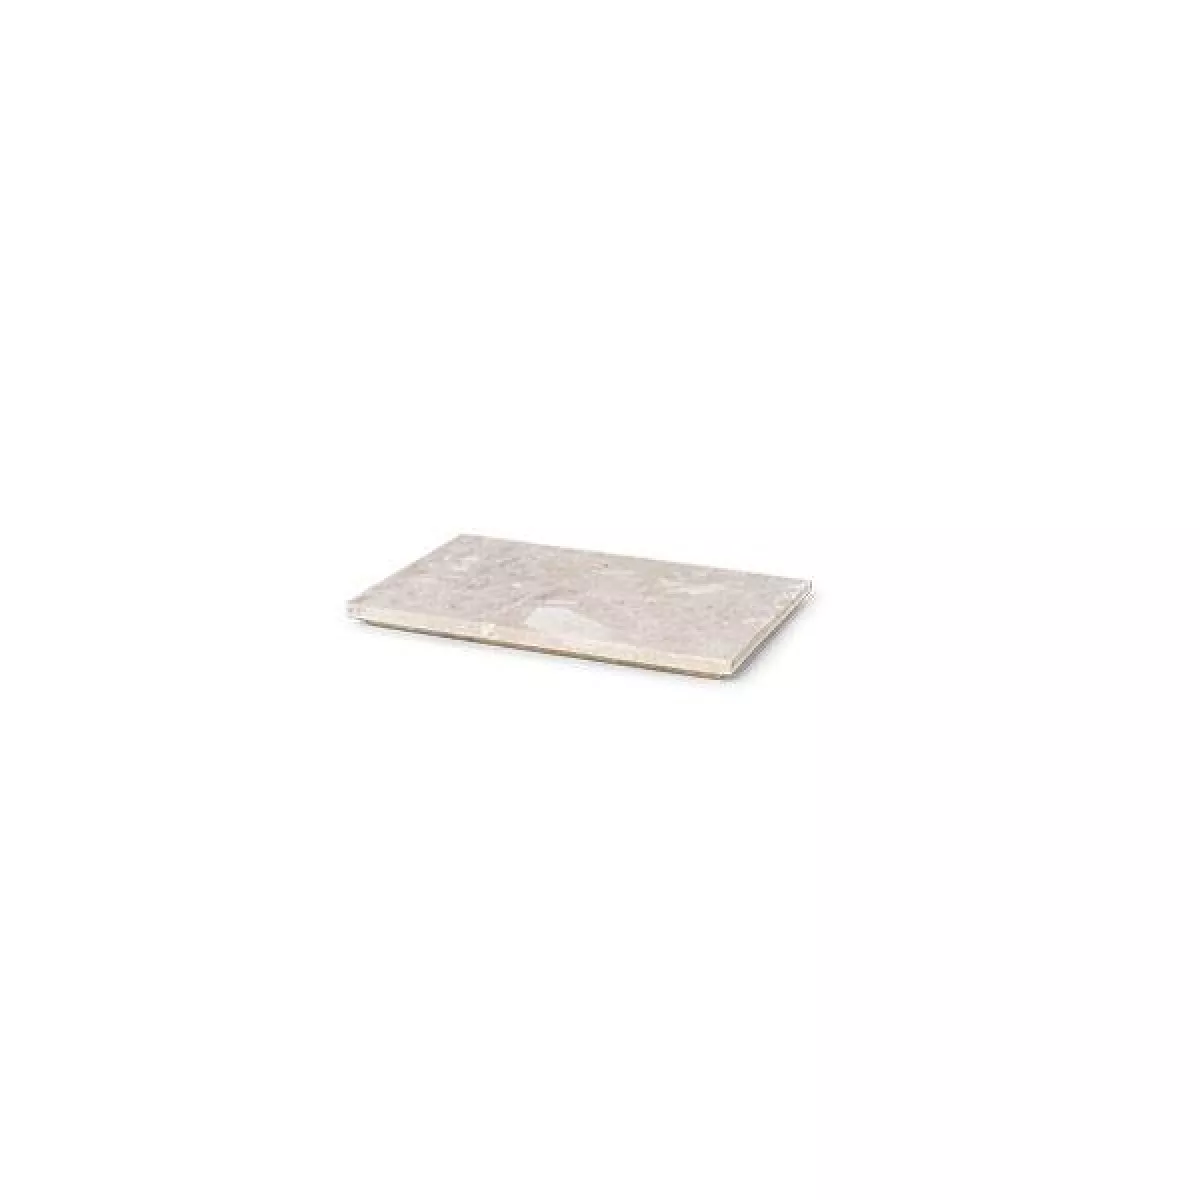 #1 - Ferm Living Tray for plant box - Marble-Beige